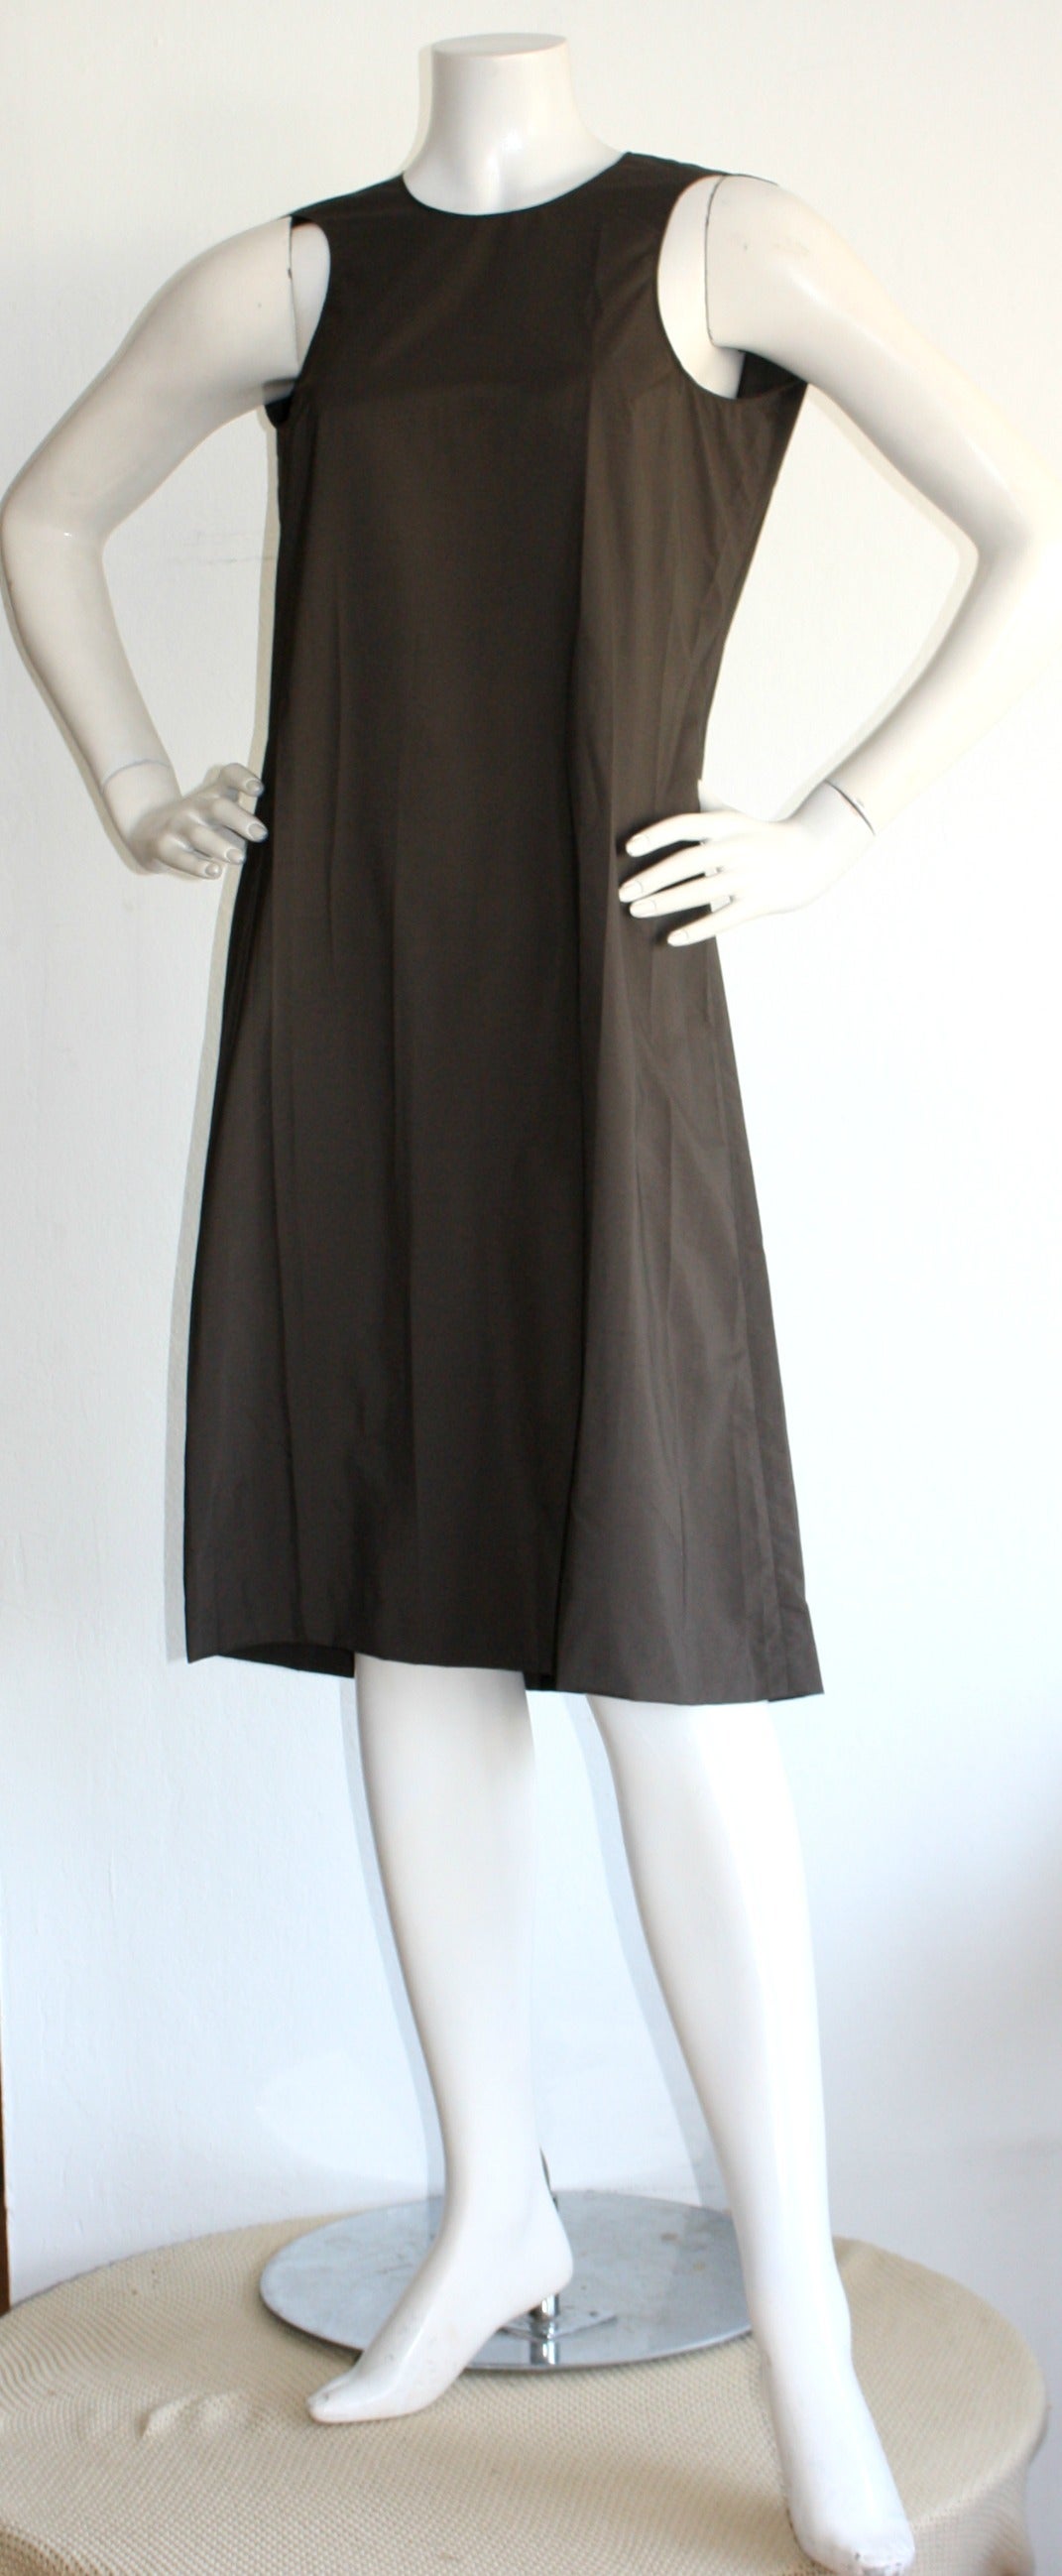 Incredible design by the great Martin Margiela! Beautiful coffee brown Avant Garde dress, with chic cascading sleeves in the front. Sleeves cover back shoulders. Coffee color has a black undertone, so this looks stunning paired with black! Signature